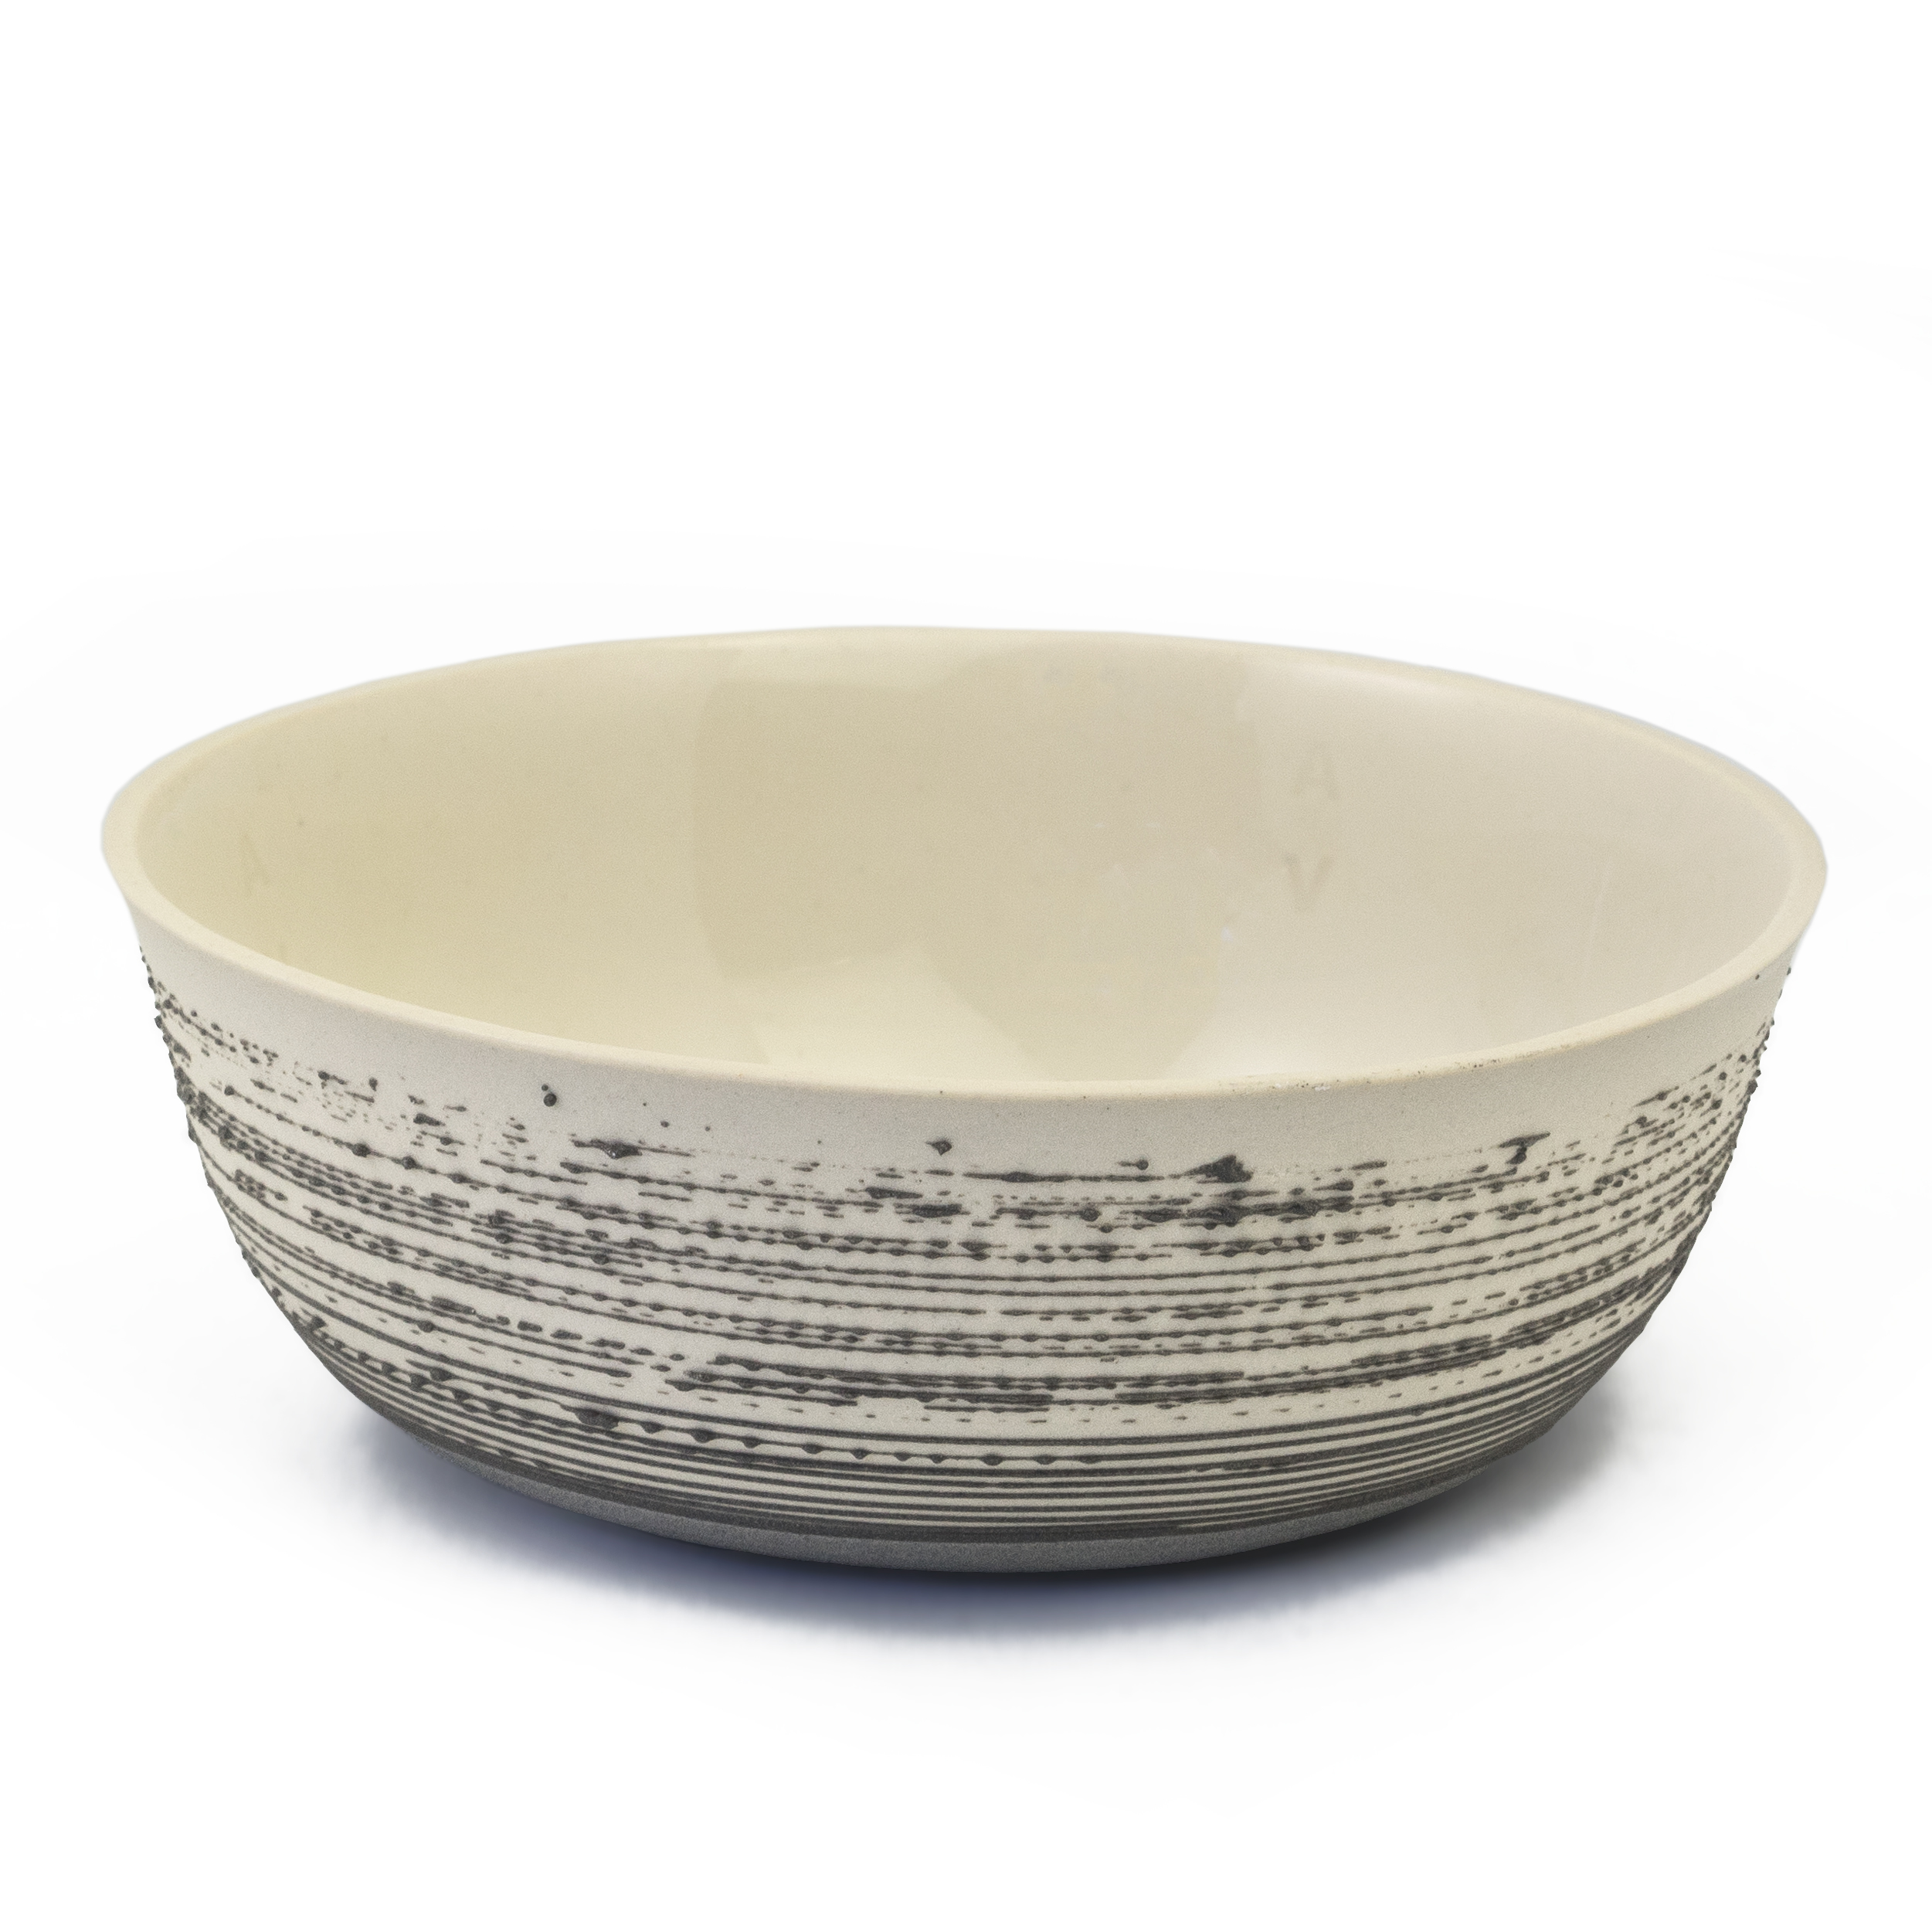 Skal Bowl- Cream with slate accent